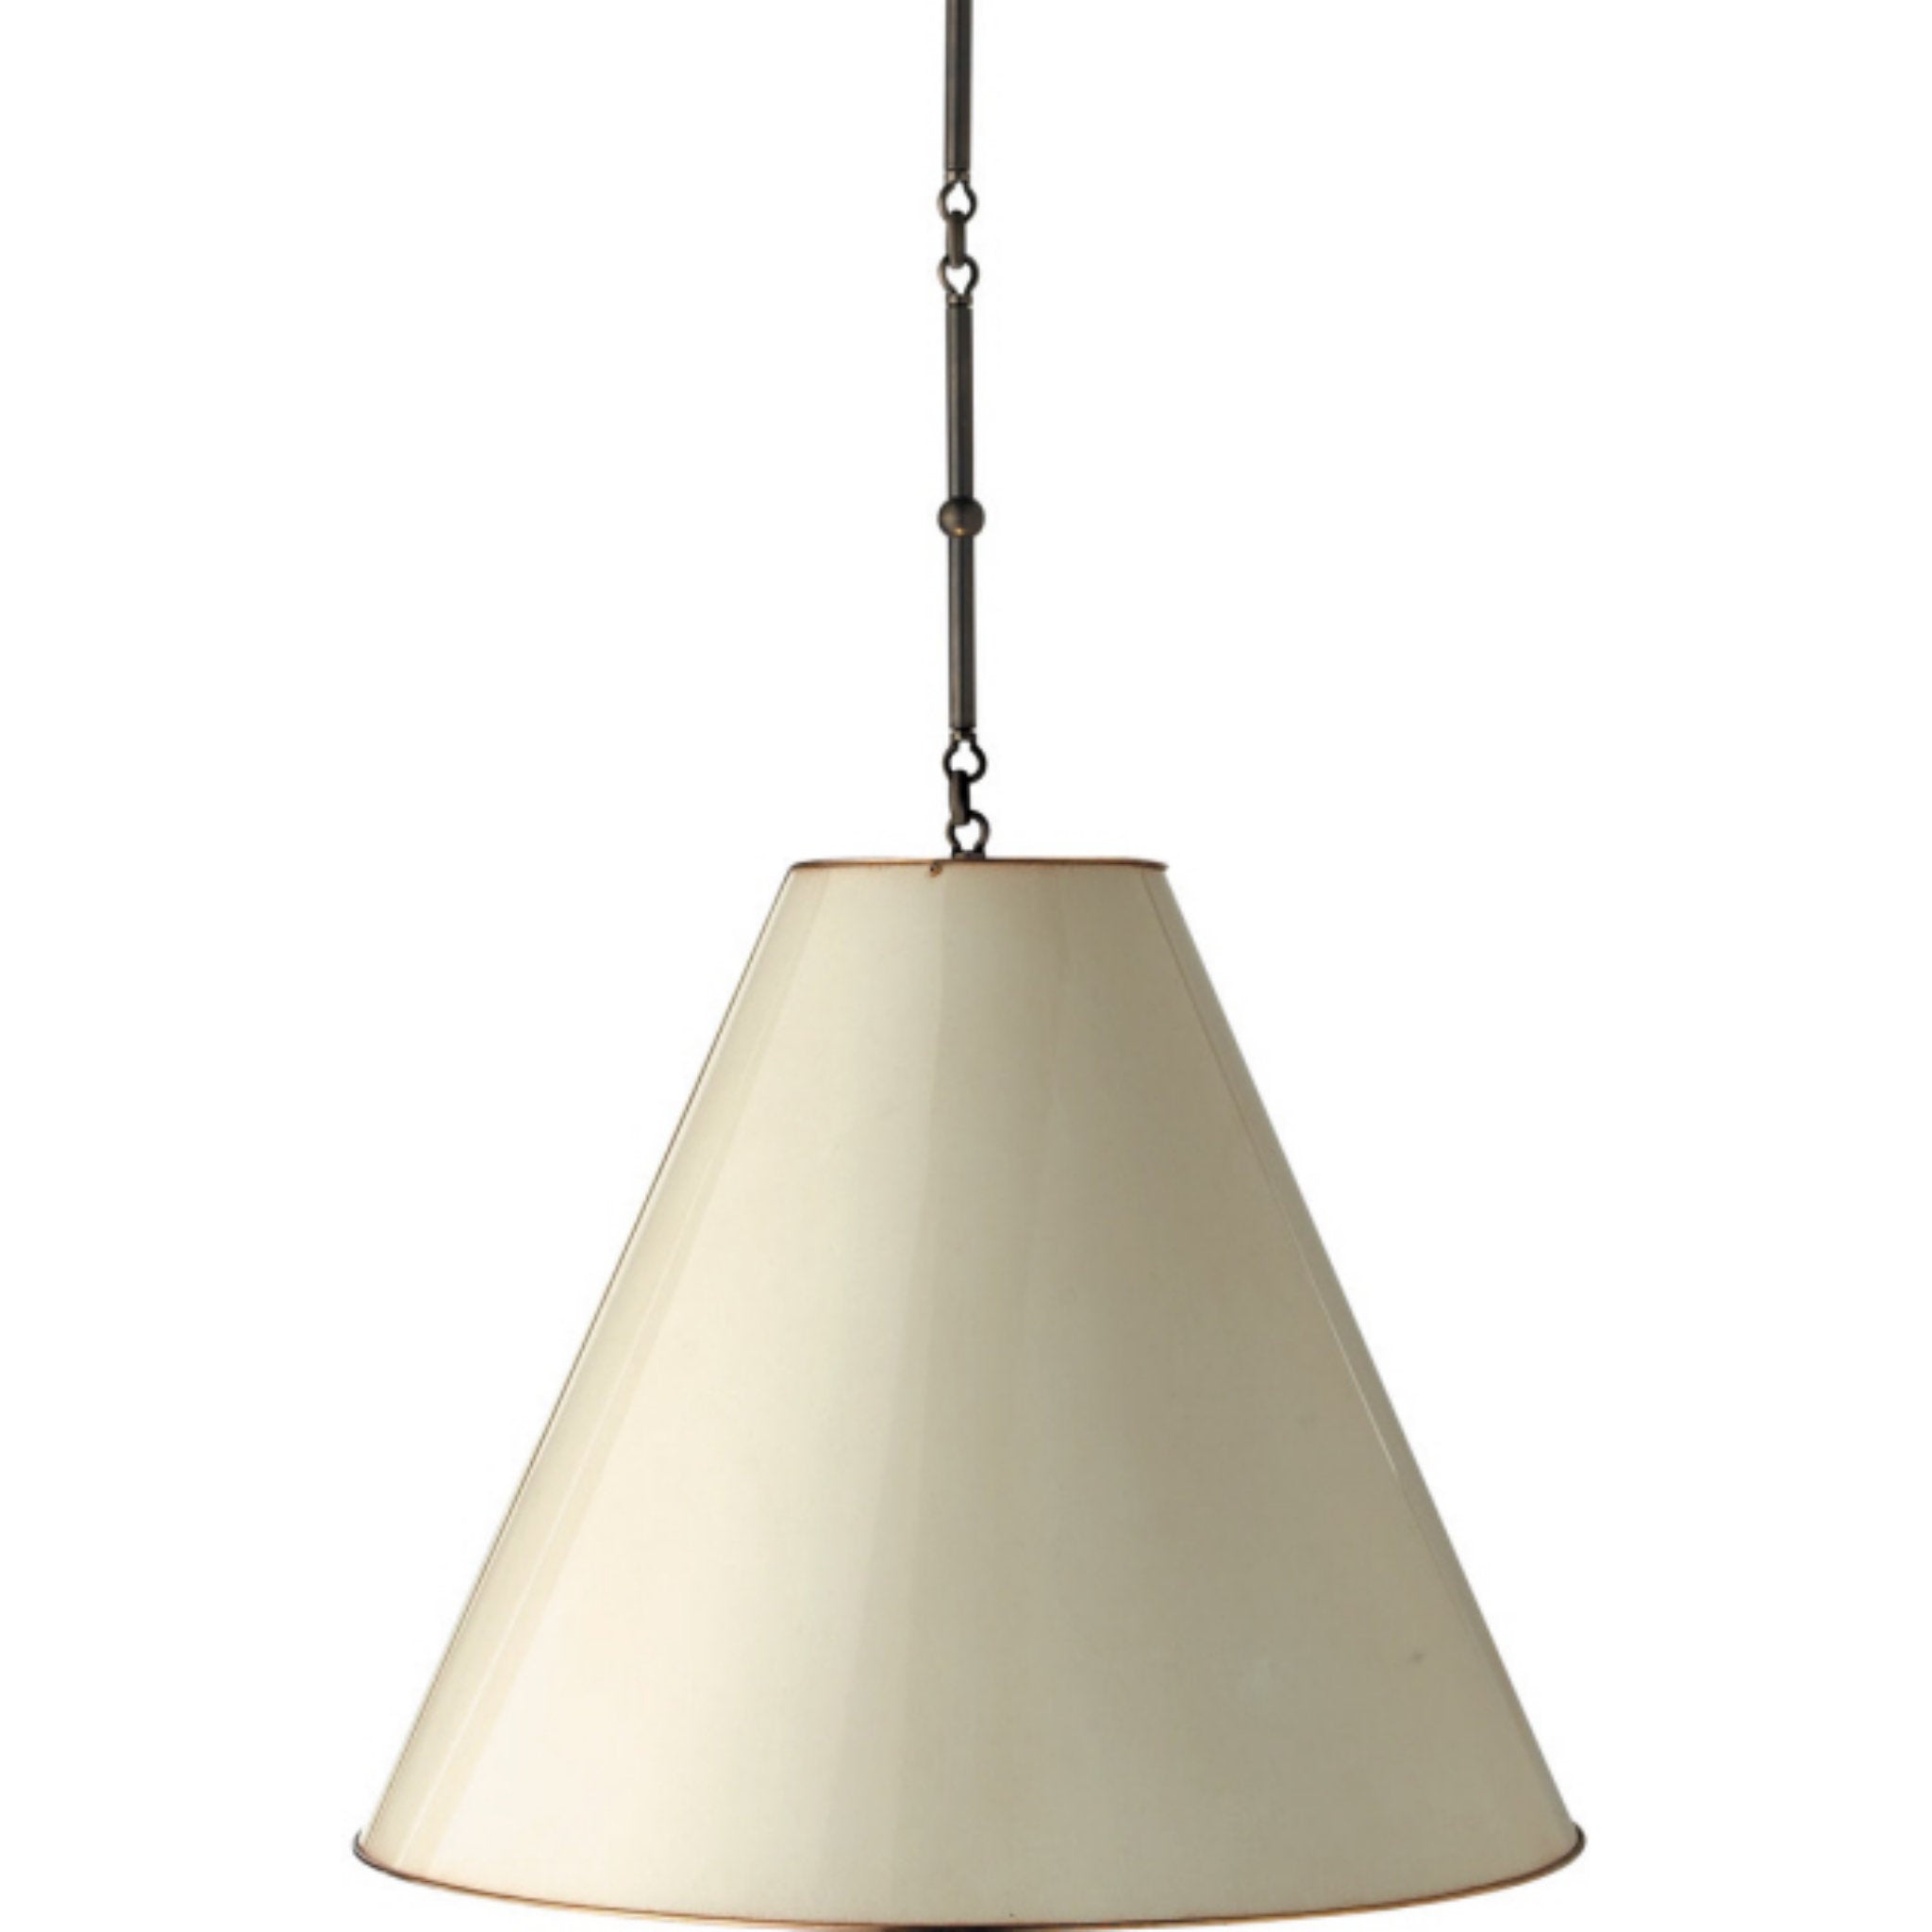 Thomas O'Brien Goodman Large Hanging Lamp in Bronze with Antique White Shade